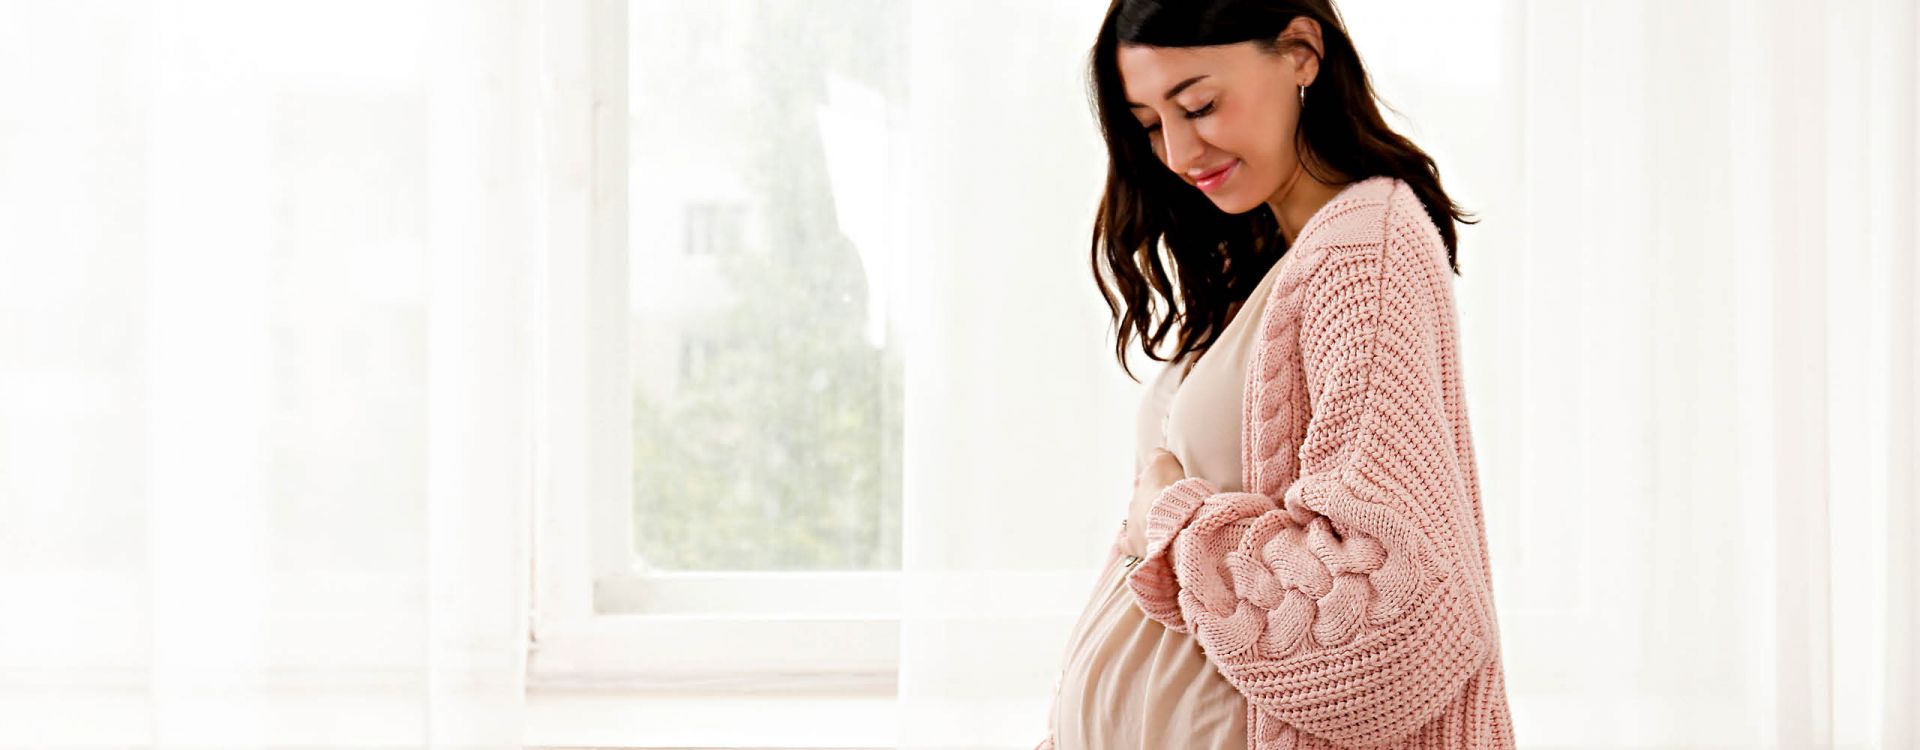 Going Home Outfit for Mom: Outfits to Wear After Birth Article Image